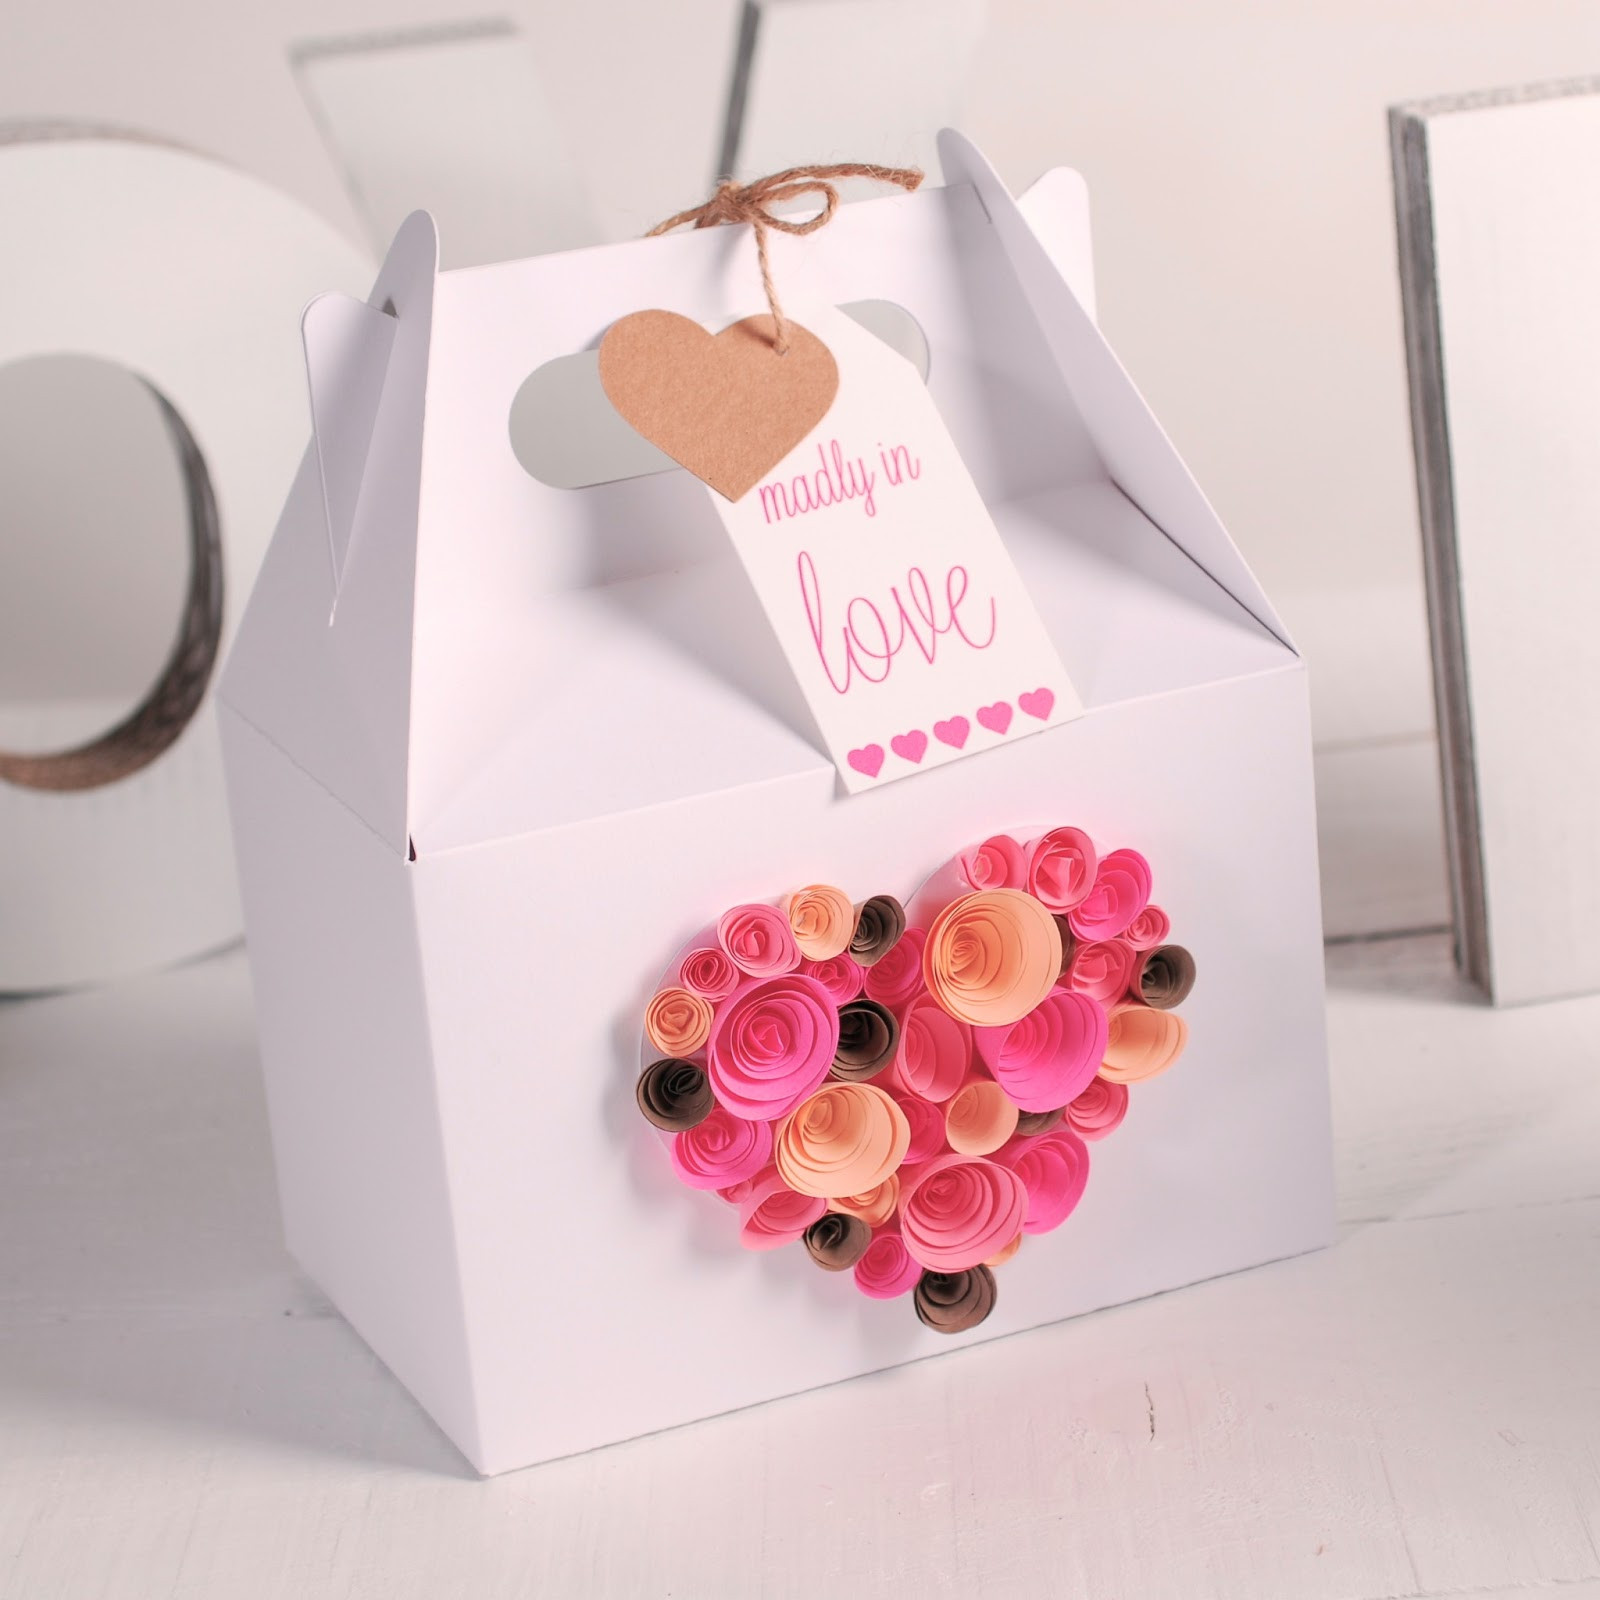 Valentine Gift Box Ideas
 Gift wrapping ideas for Valentines Day How to decorate a